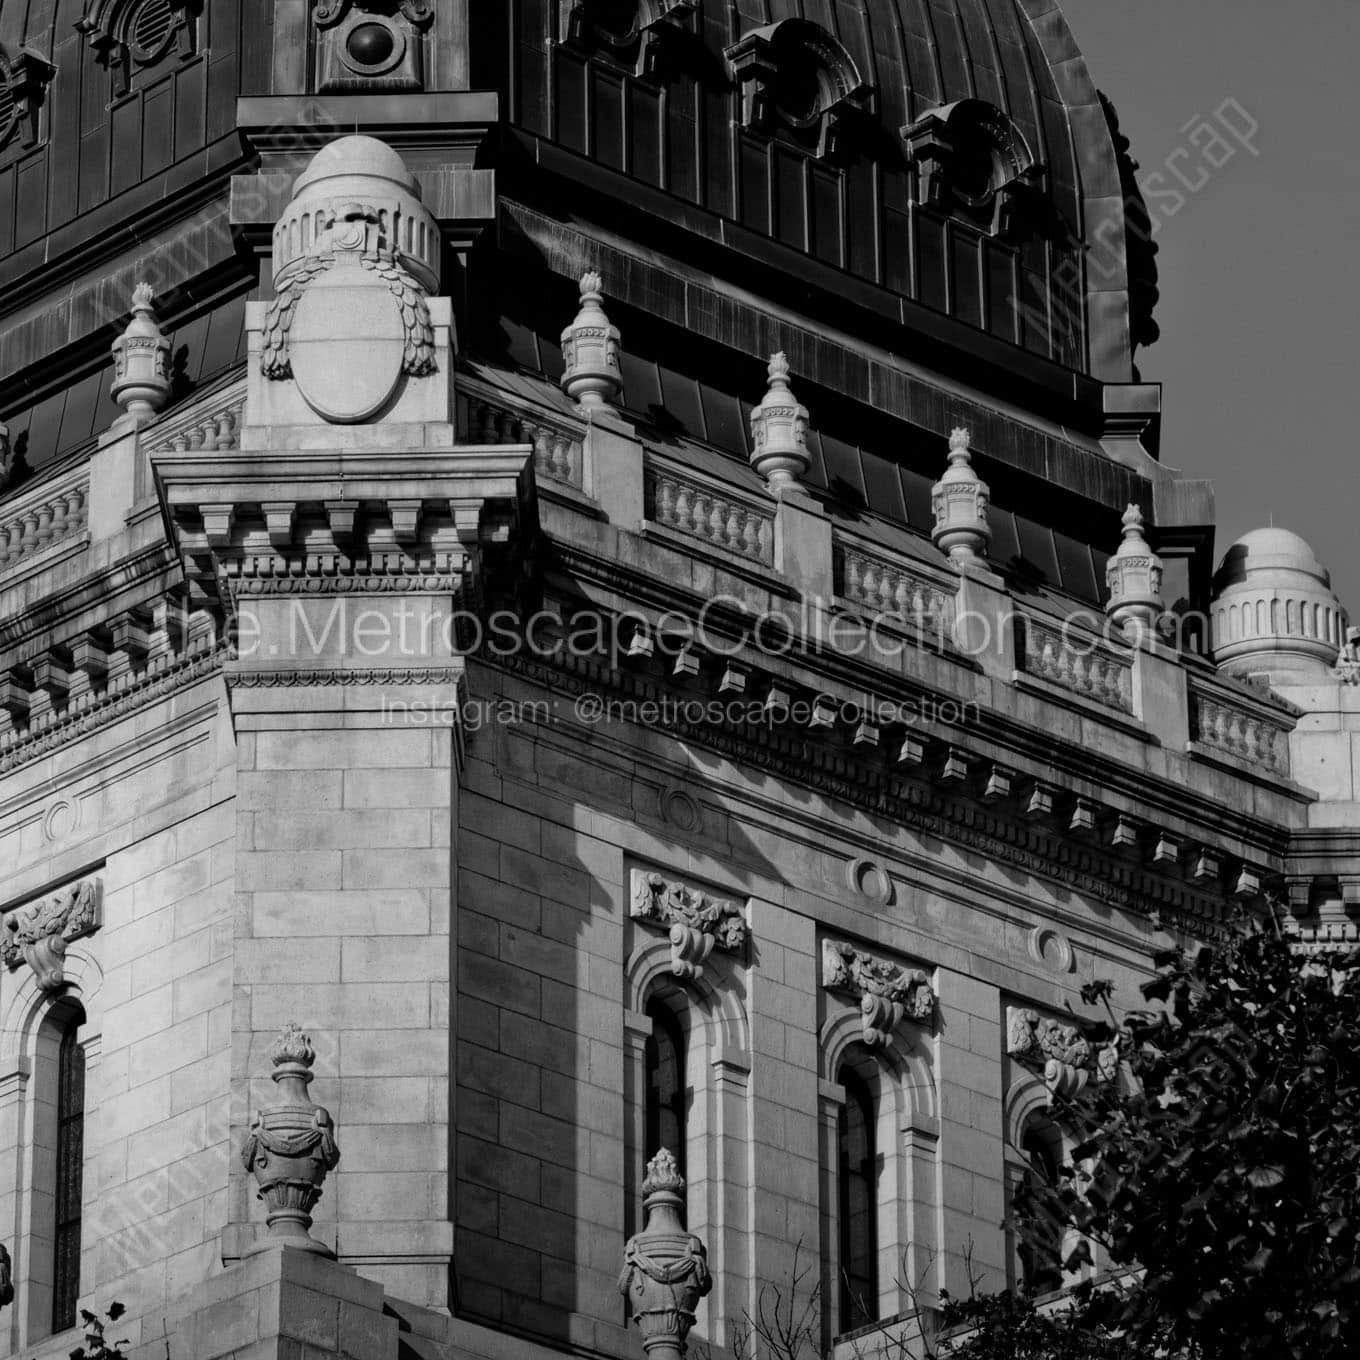 st mary basilica dome Black & White Office Art